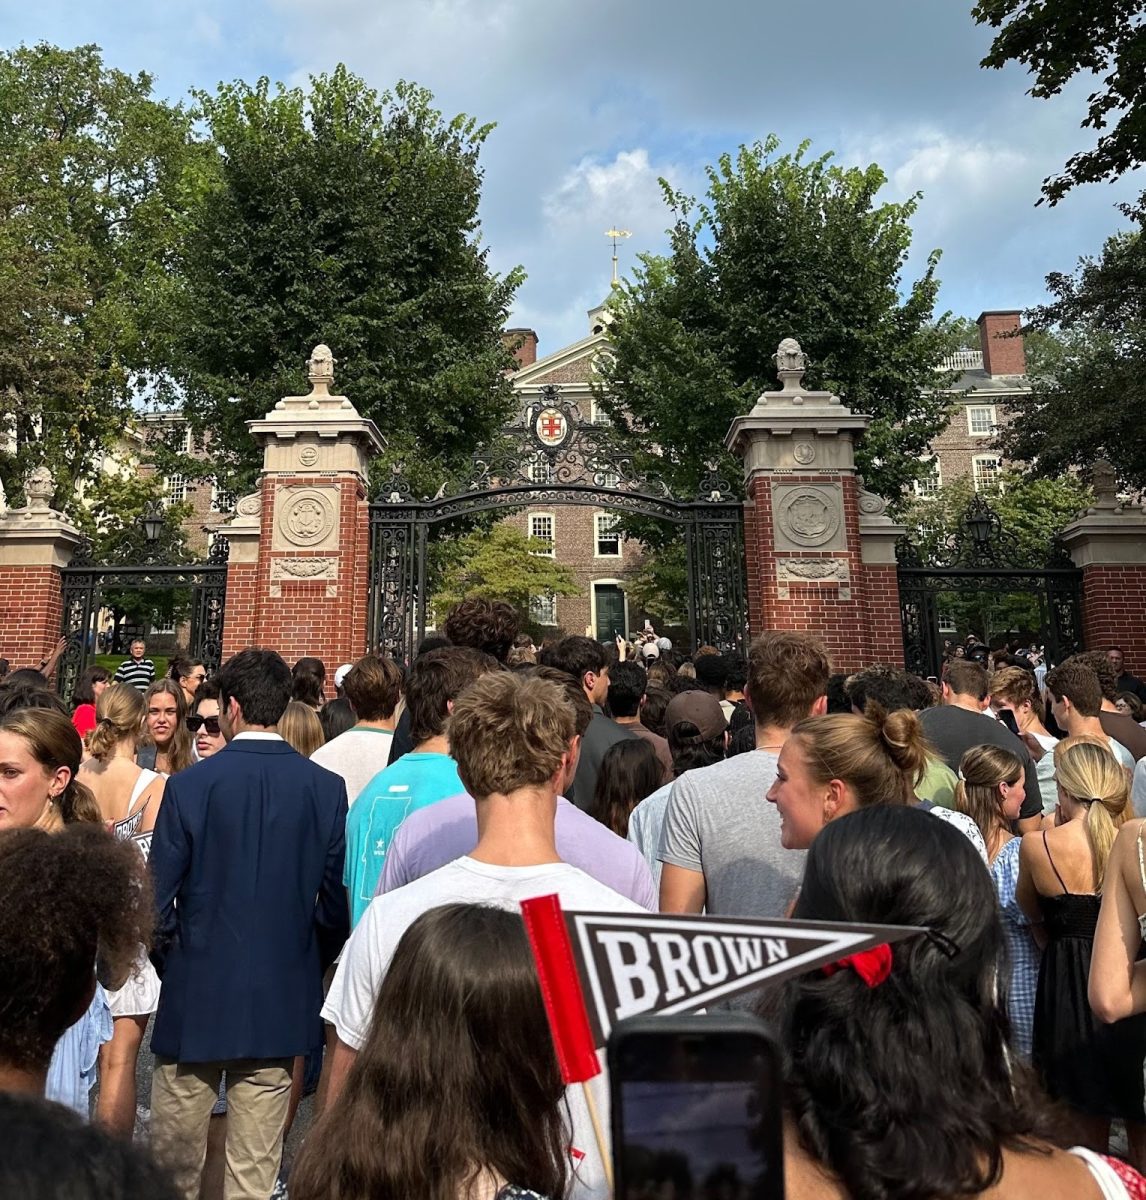 Here is Brown University and the class of 2027, the last class of students that was accepted to college when affirmative action was still permitted. Here, they are entering the main gates for the first time as incoming freshmen. (Photo Credit: Ben Ro; used by permission)